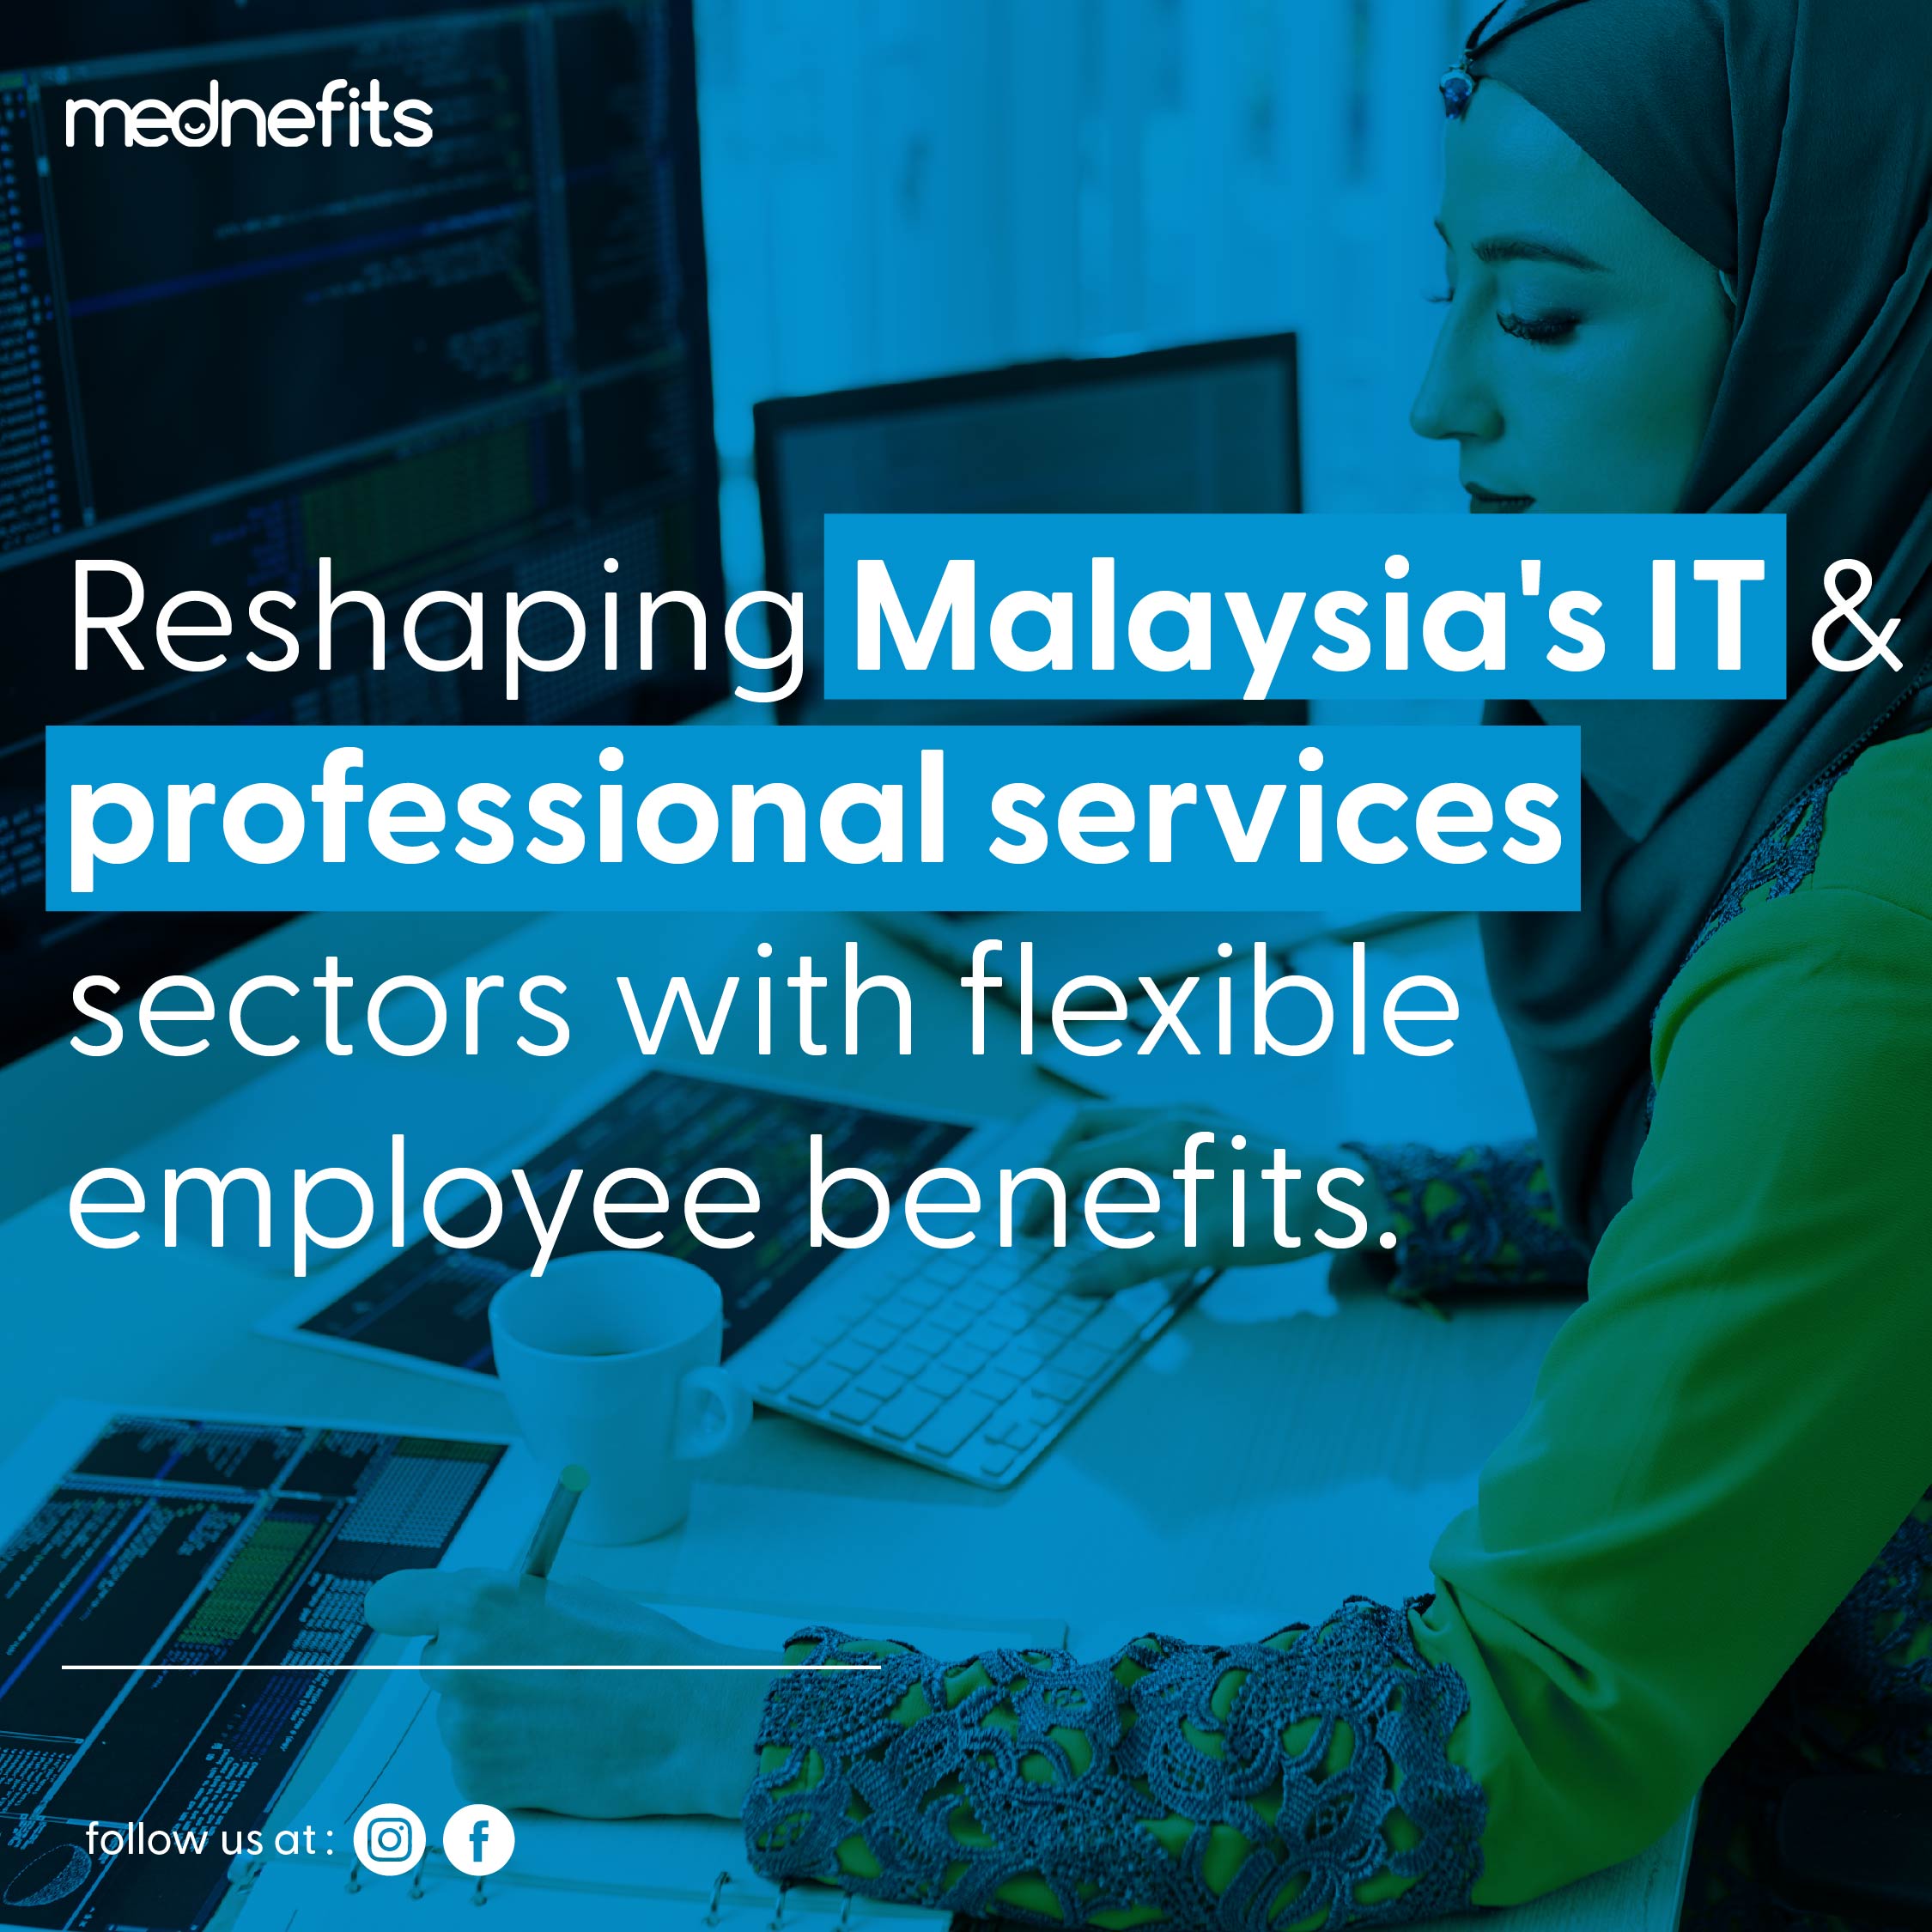 Reshaping Malaysia’s IT & professional services sectors with flexible employee benefits